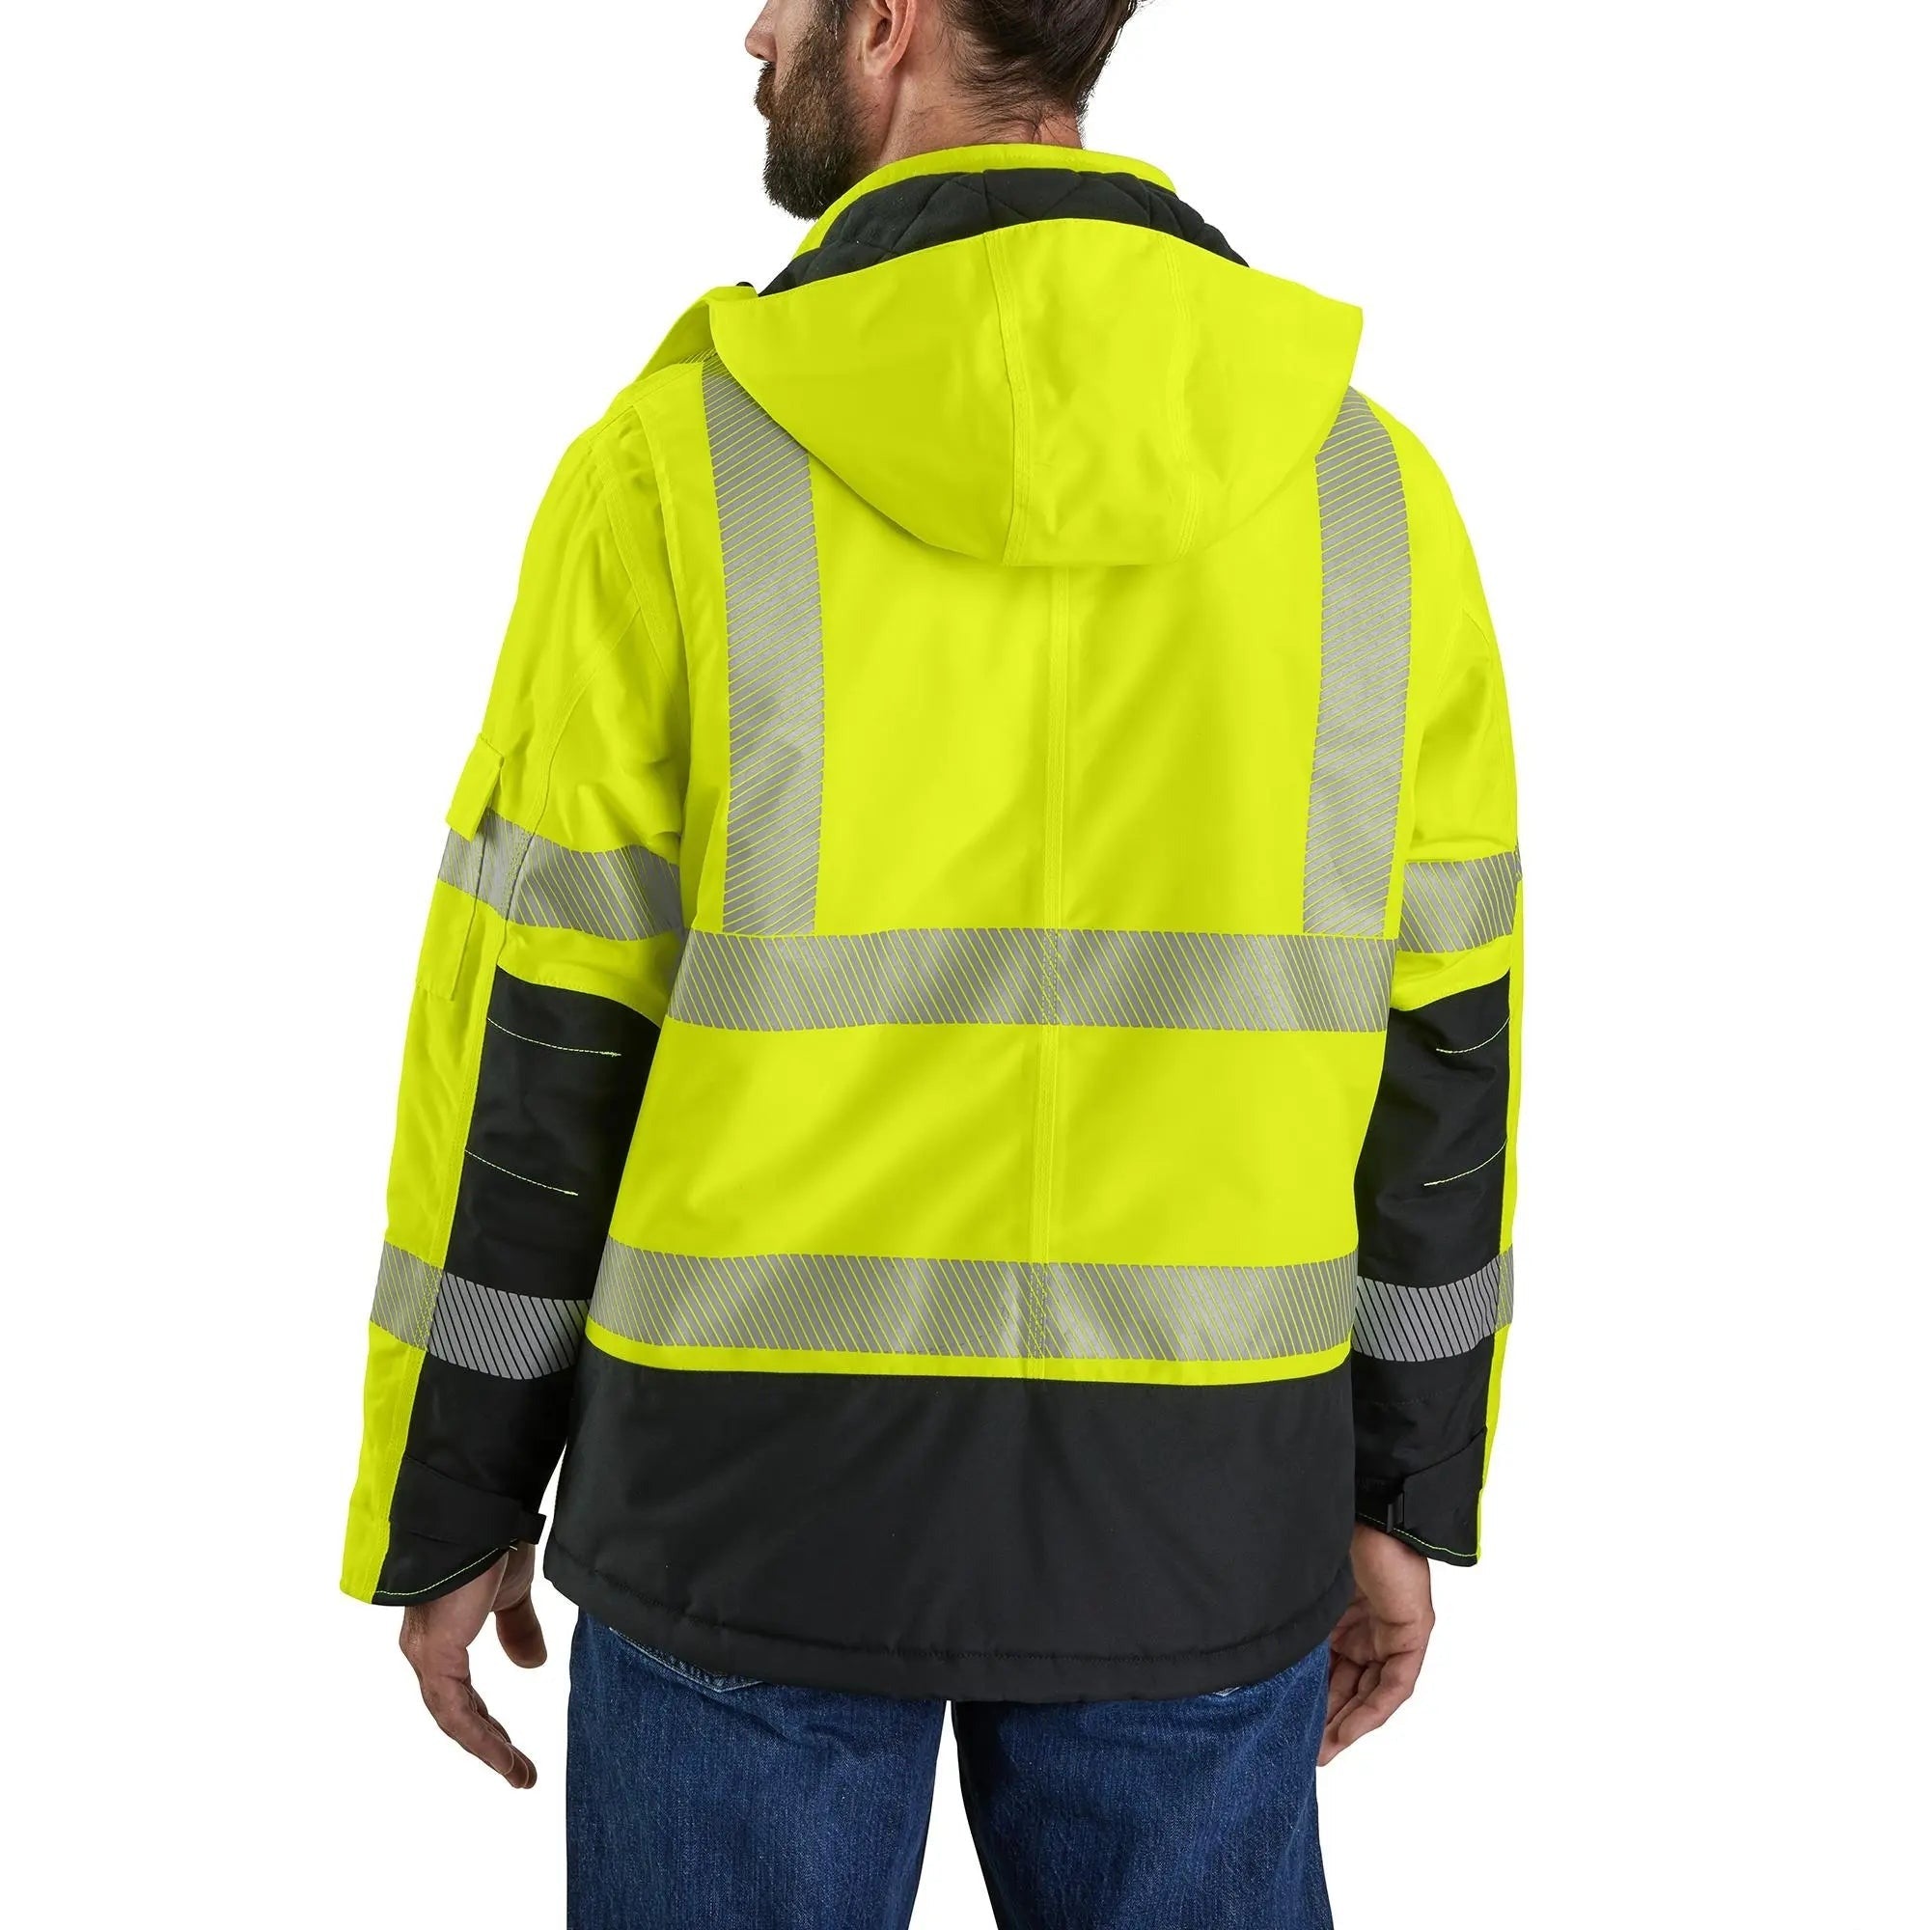 CARHARTT - High Visibility Waterproof Class 3 Sherwood Jacket - Becker Safety and Supply